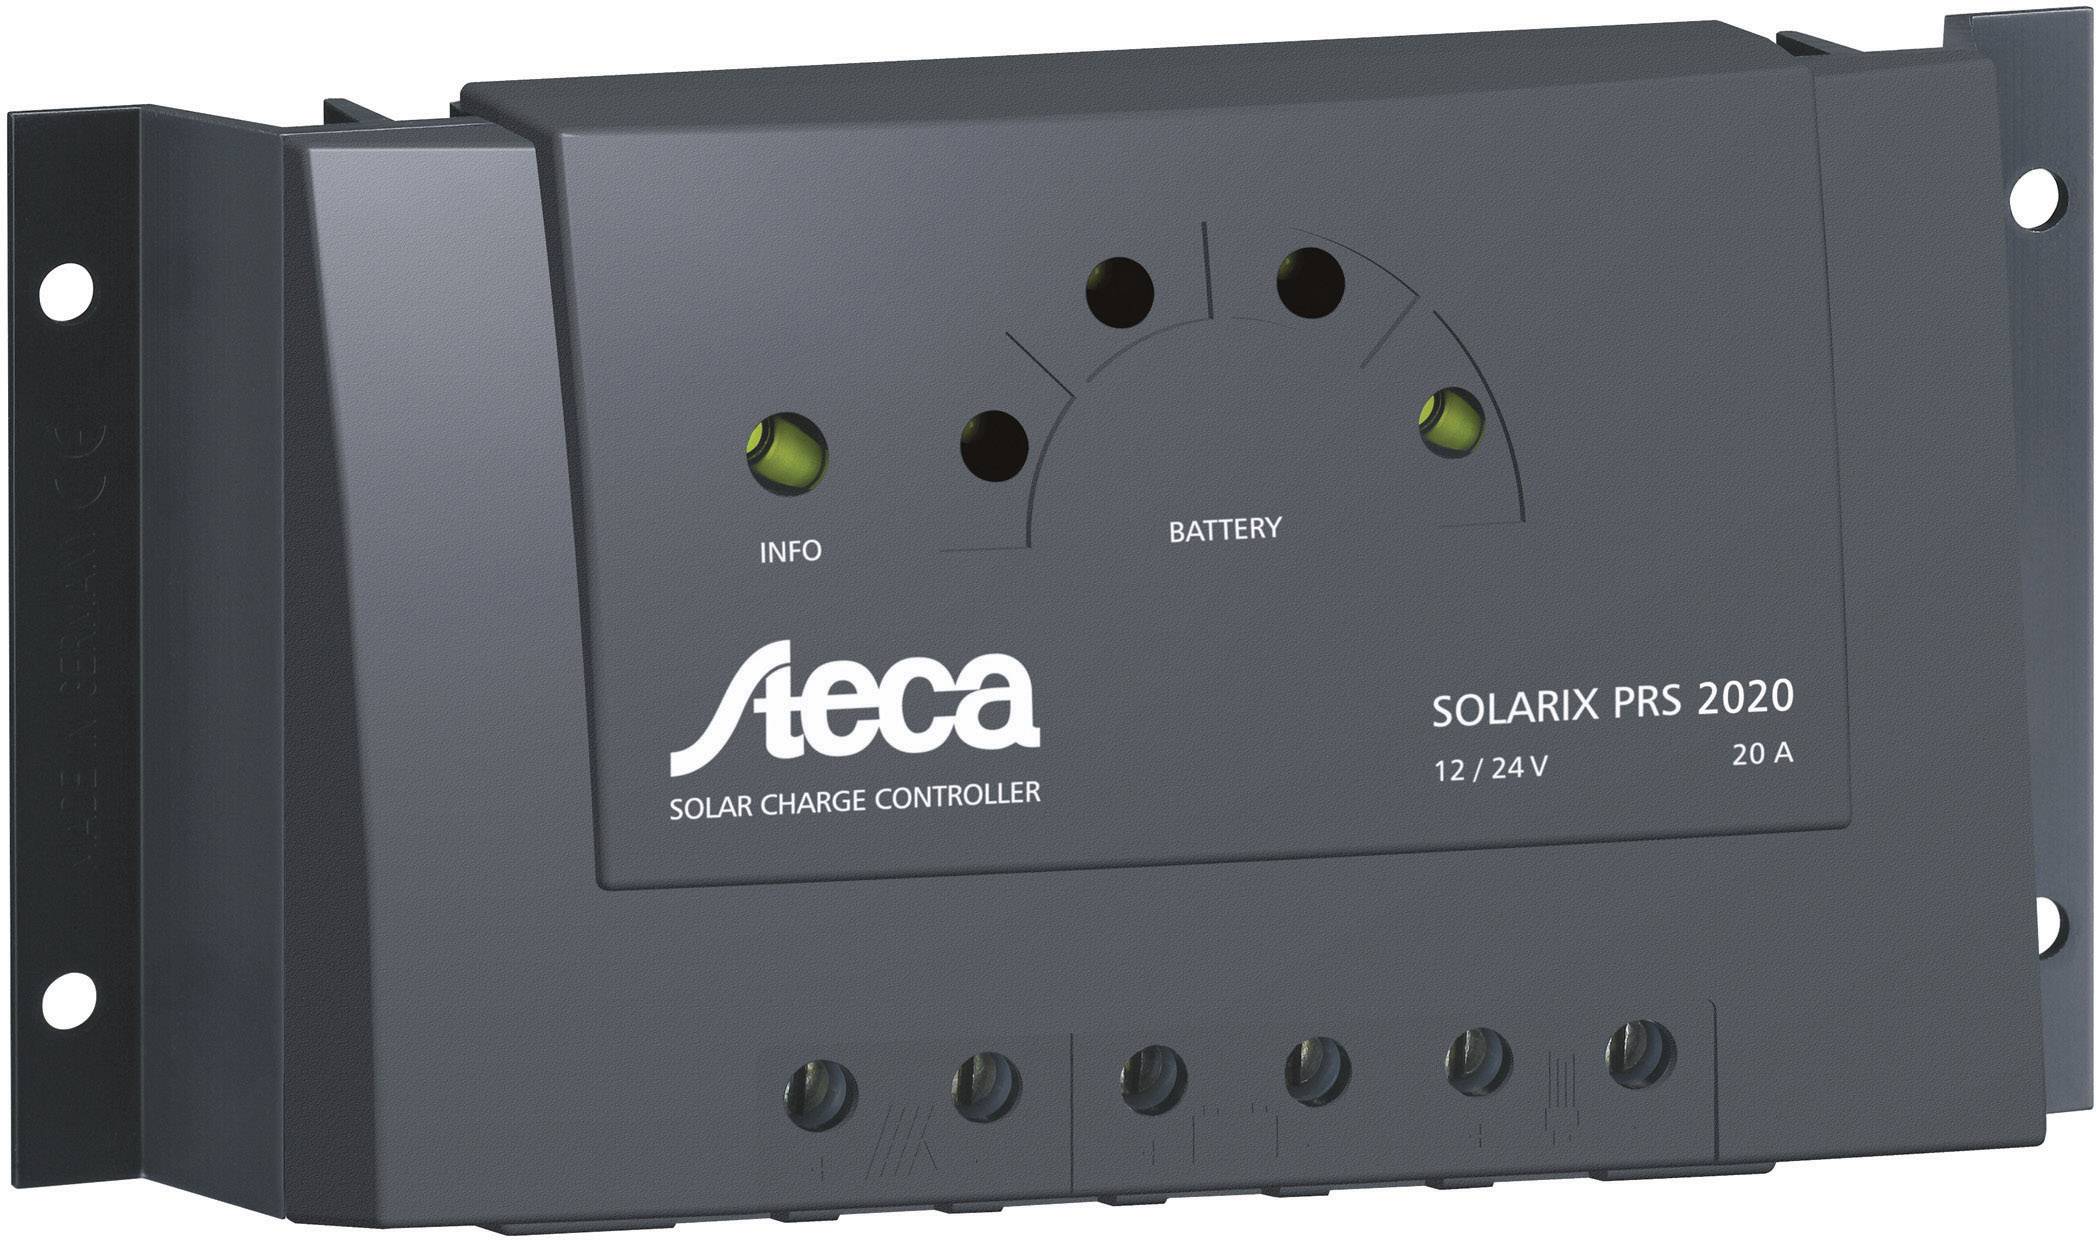 Details about   Steca Solarix PRS 2020 Solar Charge Controller 20A 12/24V 